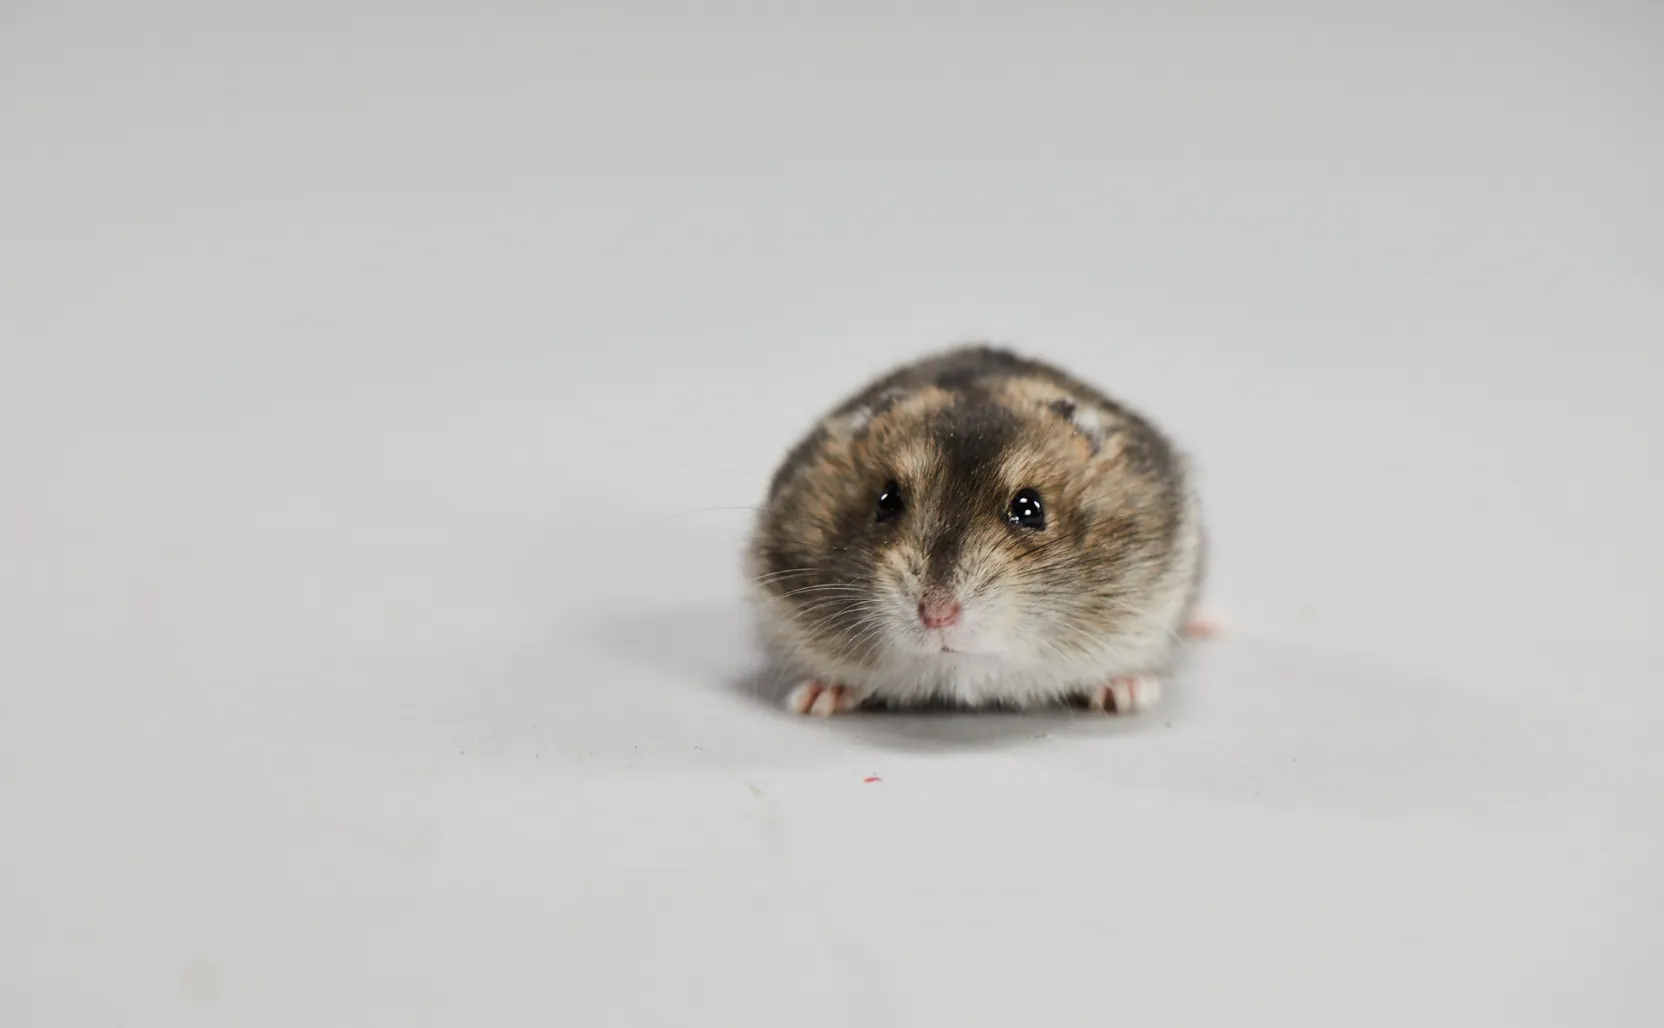 Ontario Hamster Club - Lifespan of a hamster Hamsters, as we know